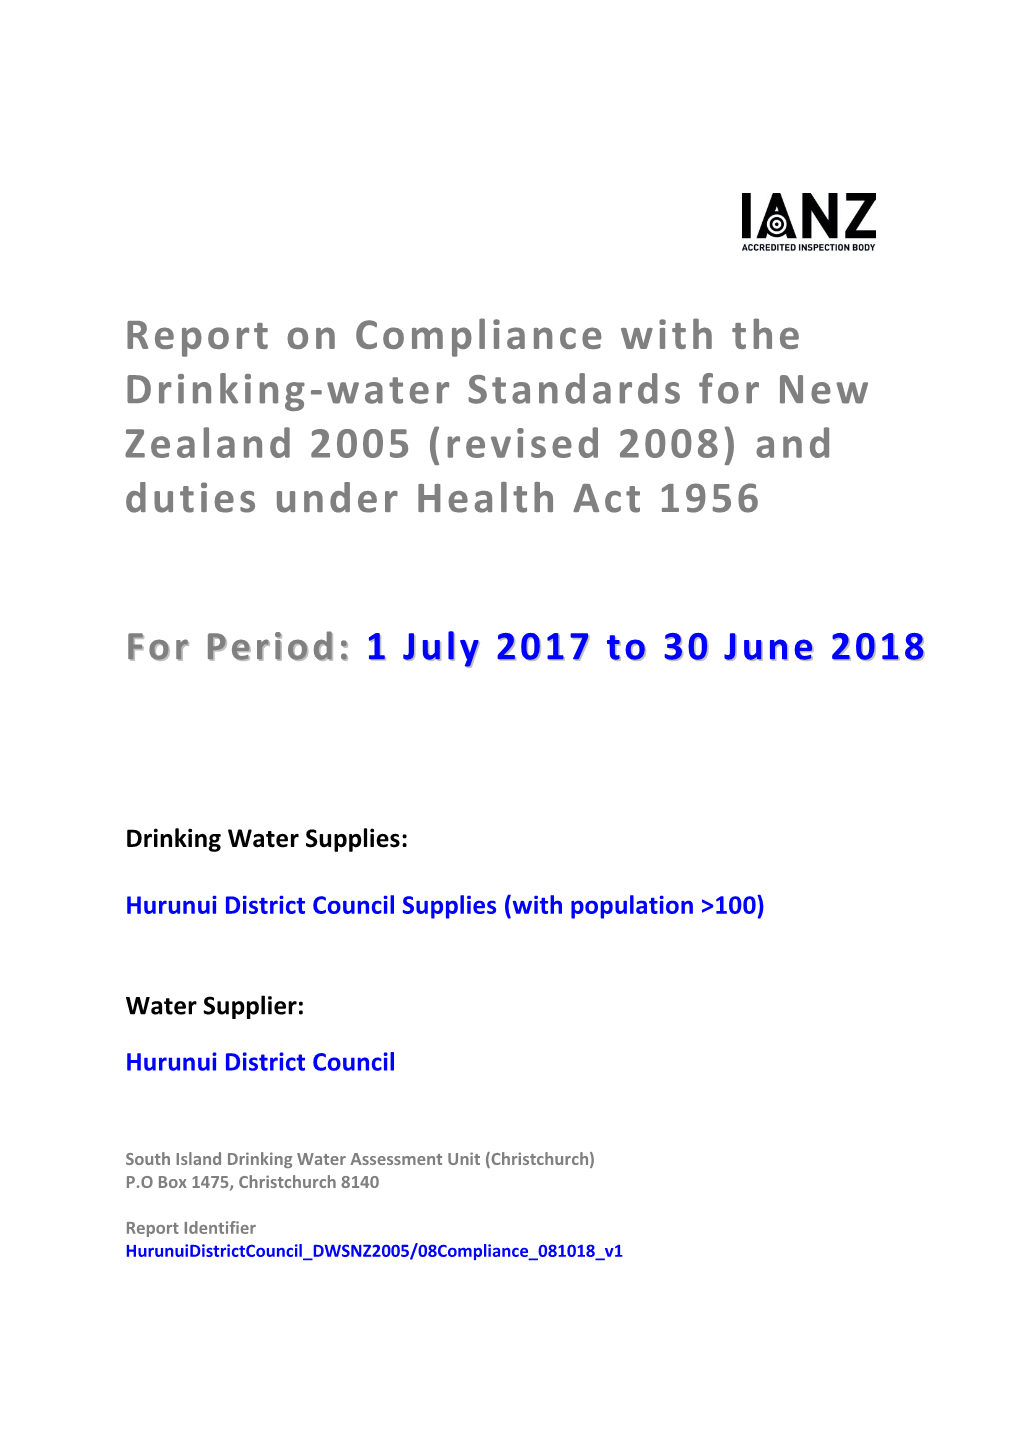 Report on Compliance with the Drinking-Water Standards for New Zealand 2005 (Revised 2008) and Duties Under Health Act 1956